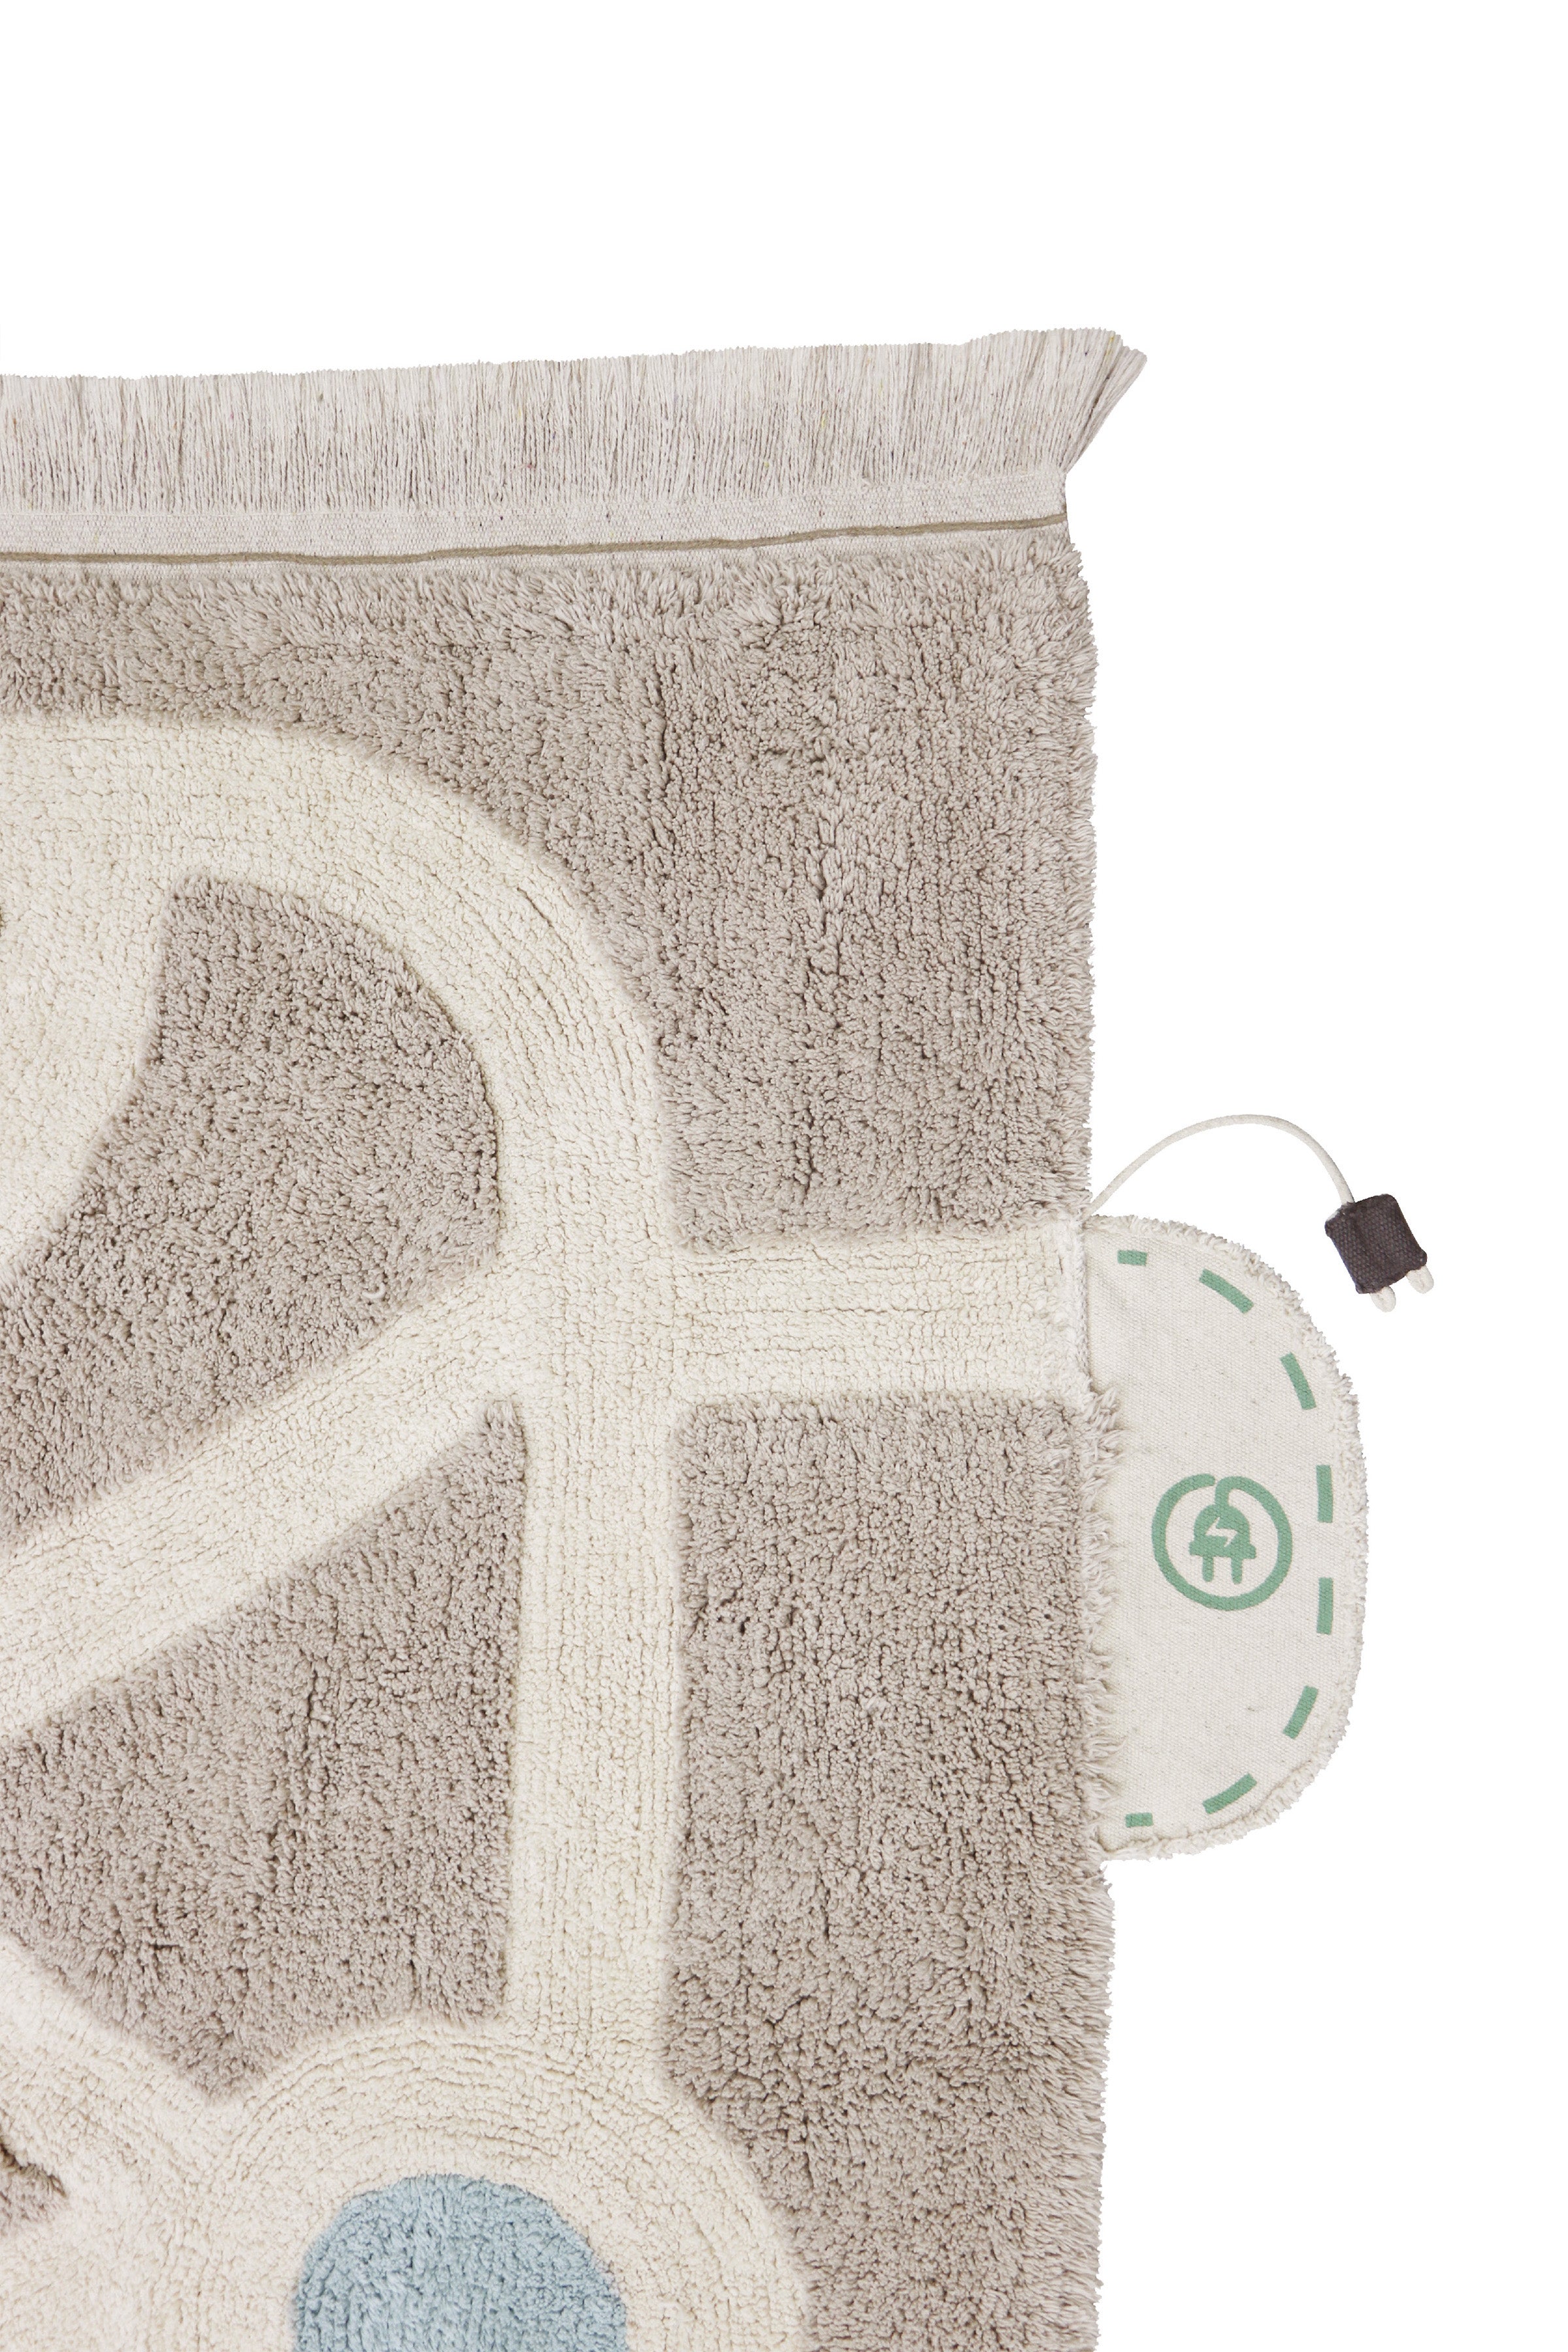 Grey, cream, blue, and green rug with city plan pattern and added city toys